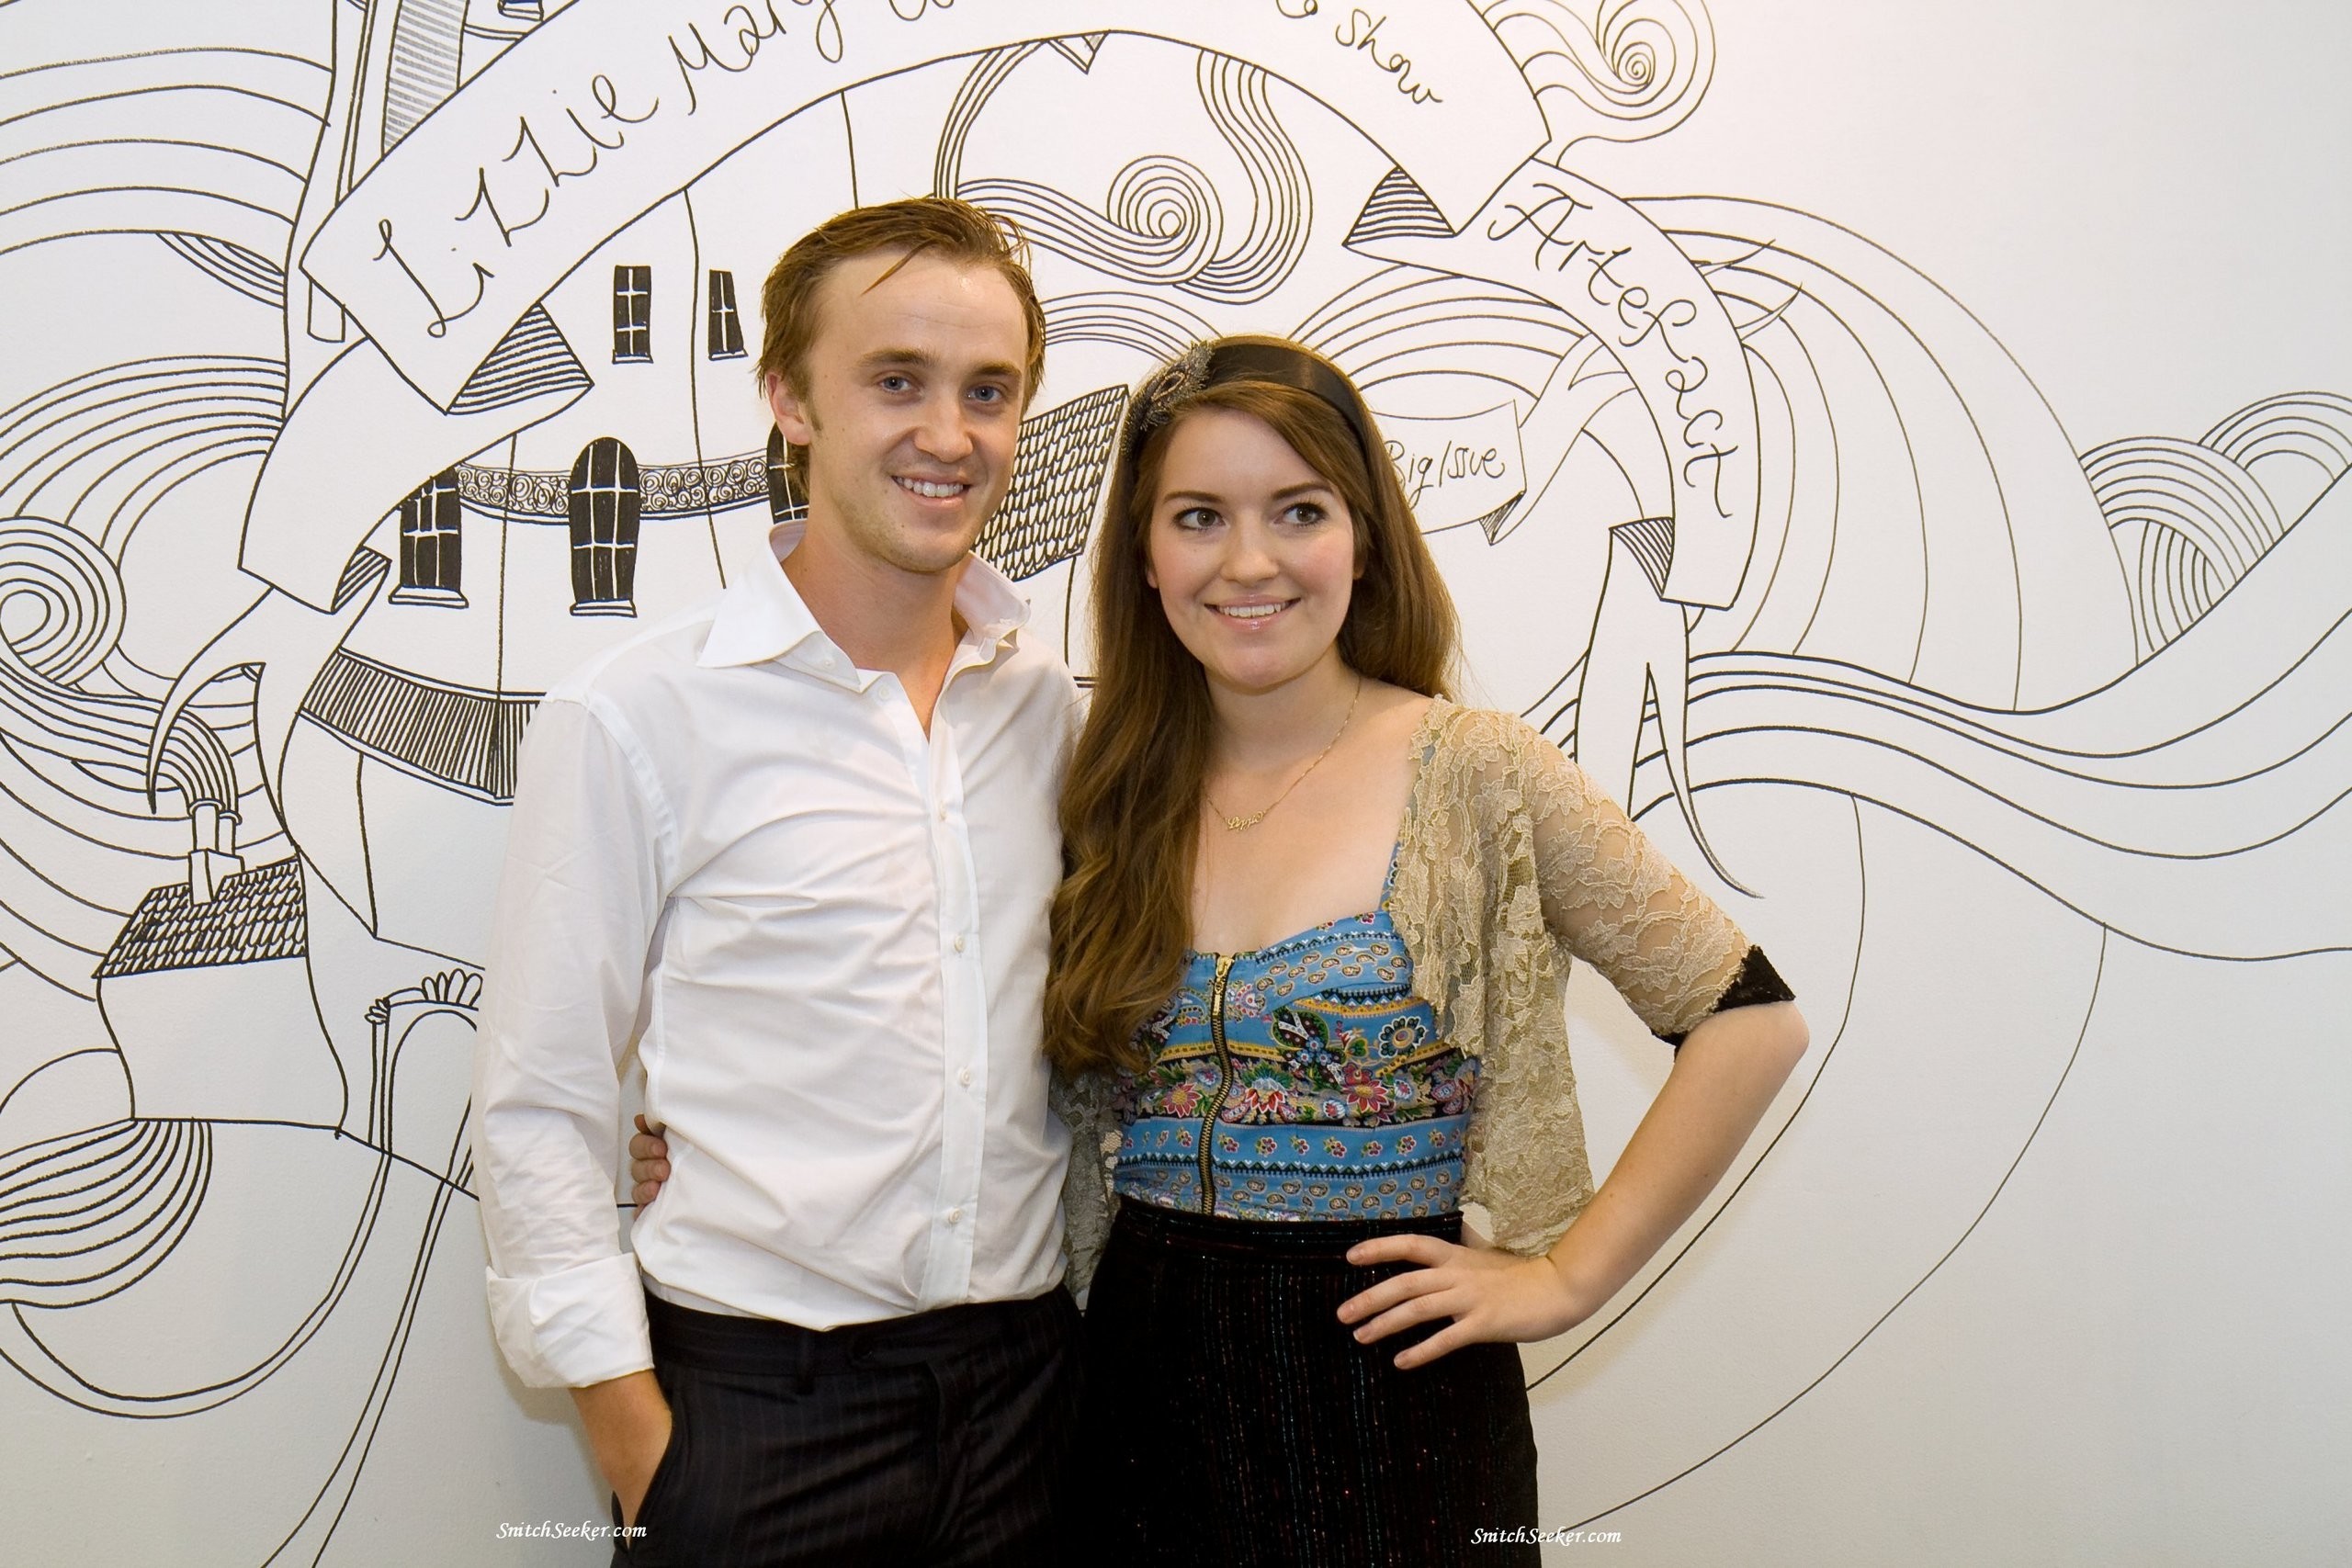 2560x1707 HD Wallpaper and background photos of Tom Felton attends Lizzie Mary Cullen  charity art exhibition for fans of Harry Potter images.